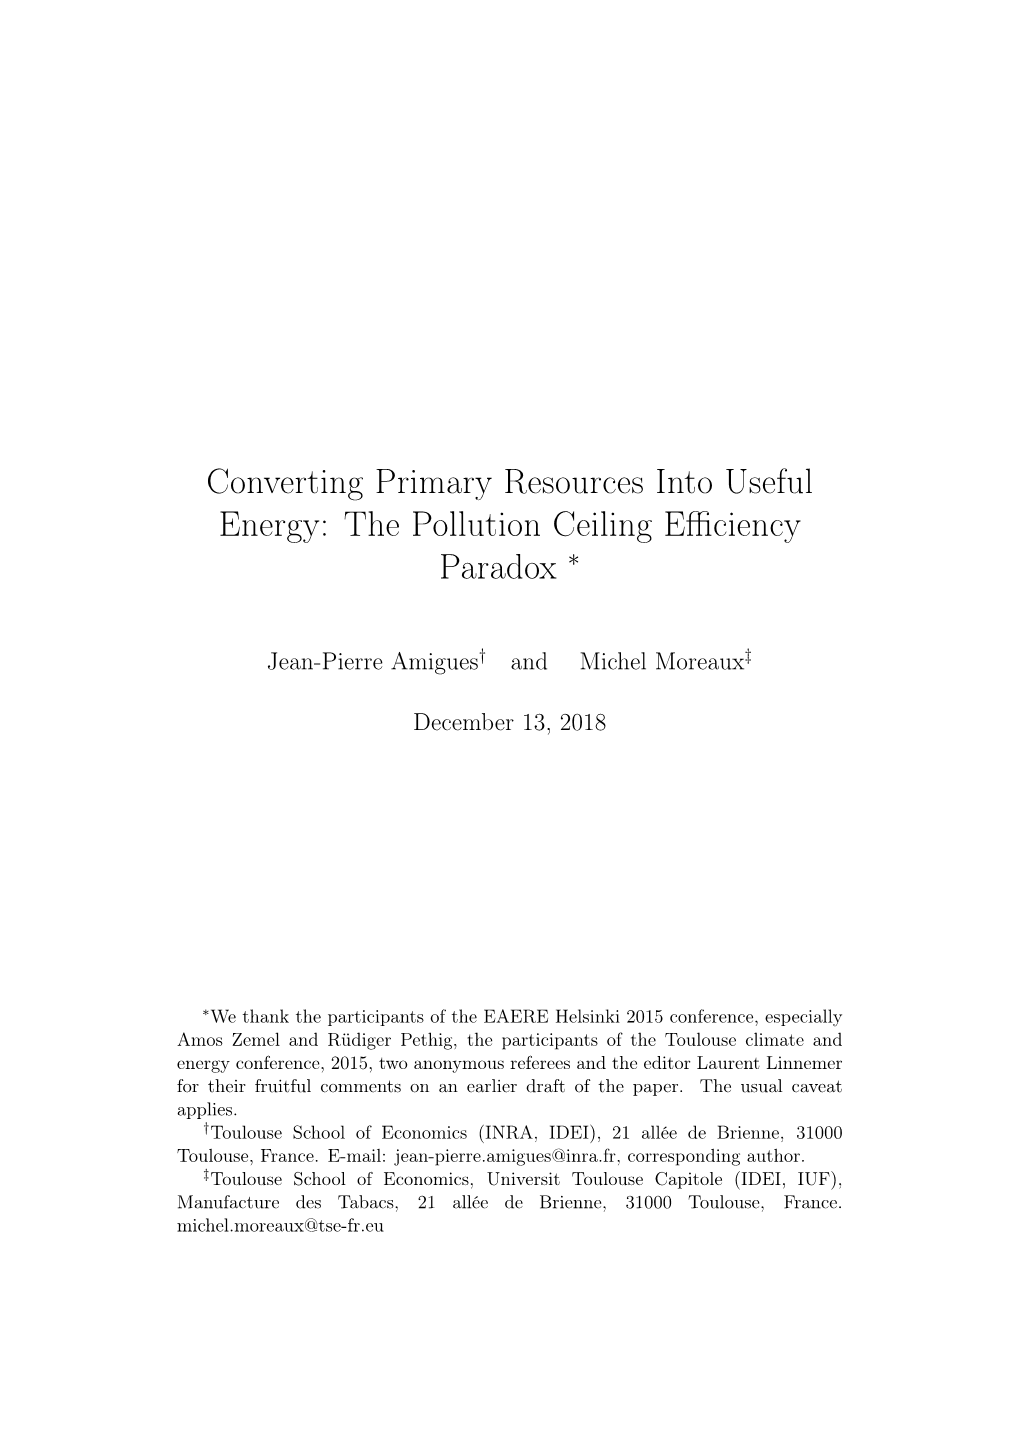 Converting Primary Resources Into Useful Energy: the Pollution Ceiling Efficiency Paradox